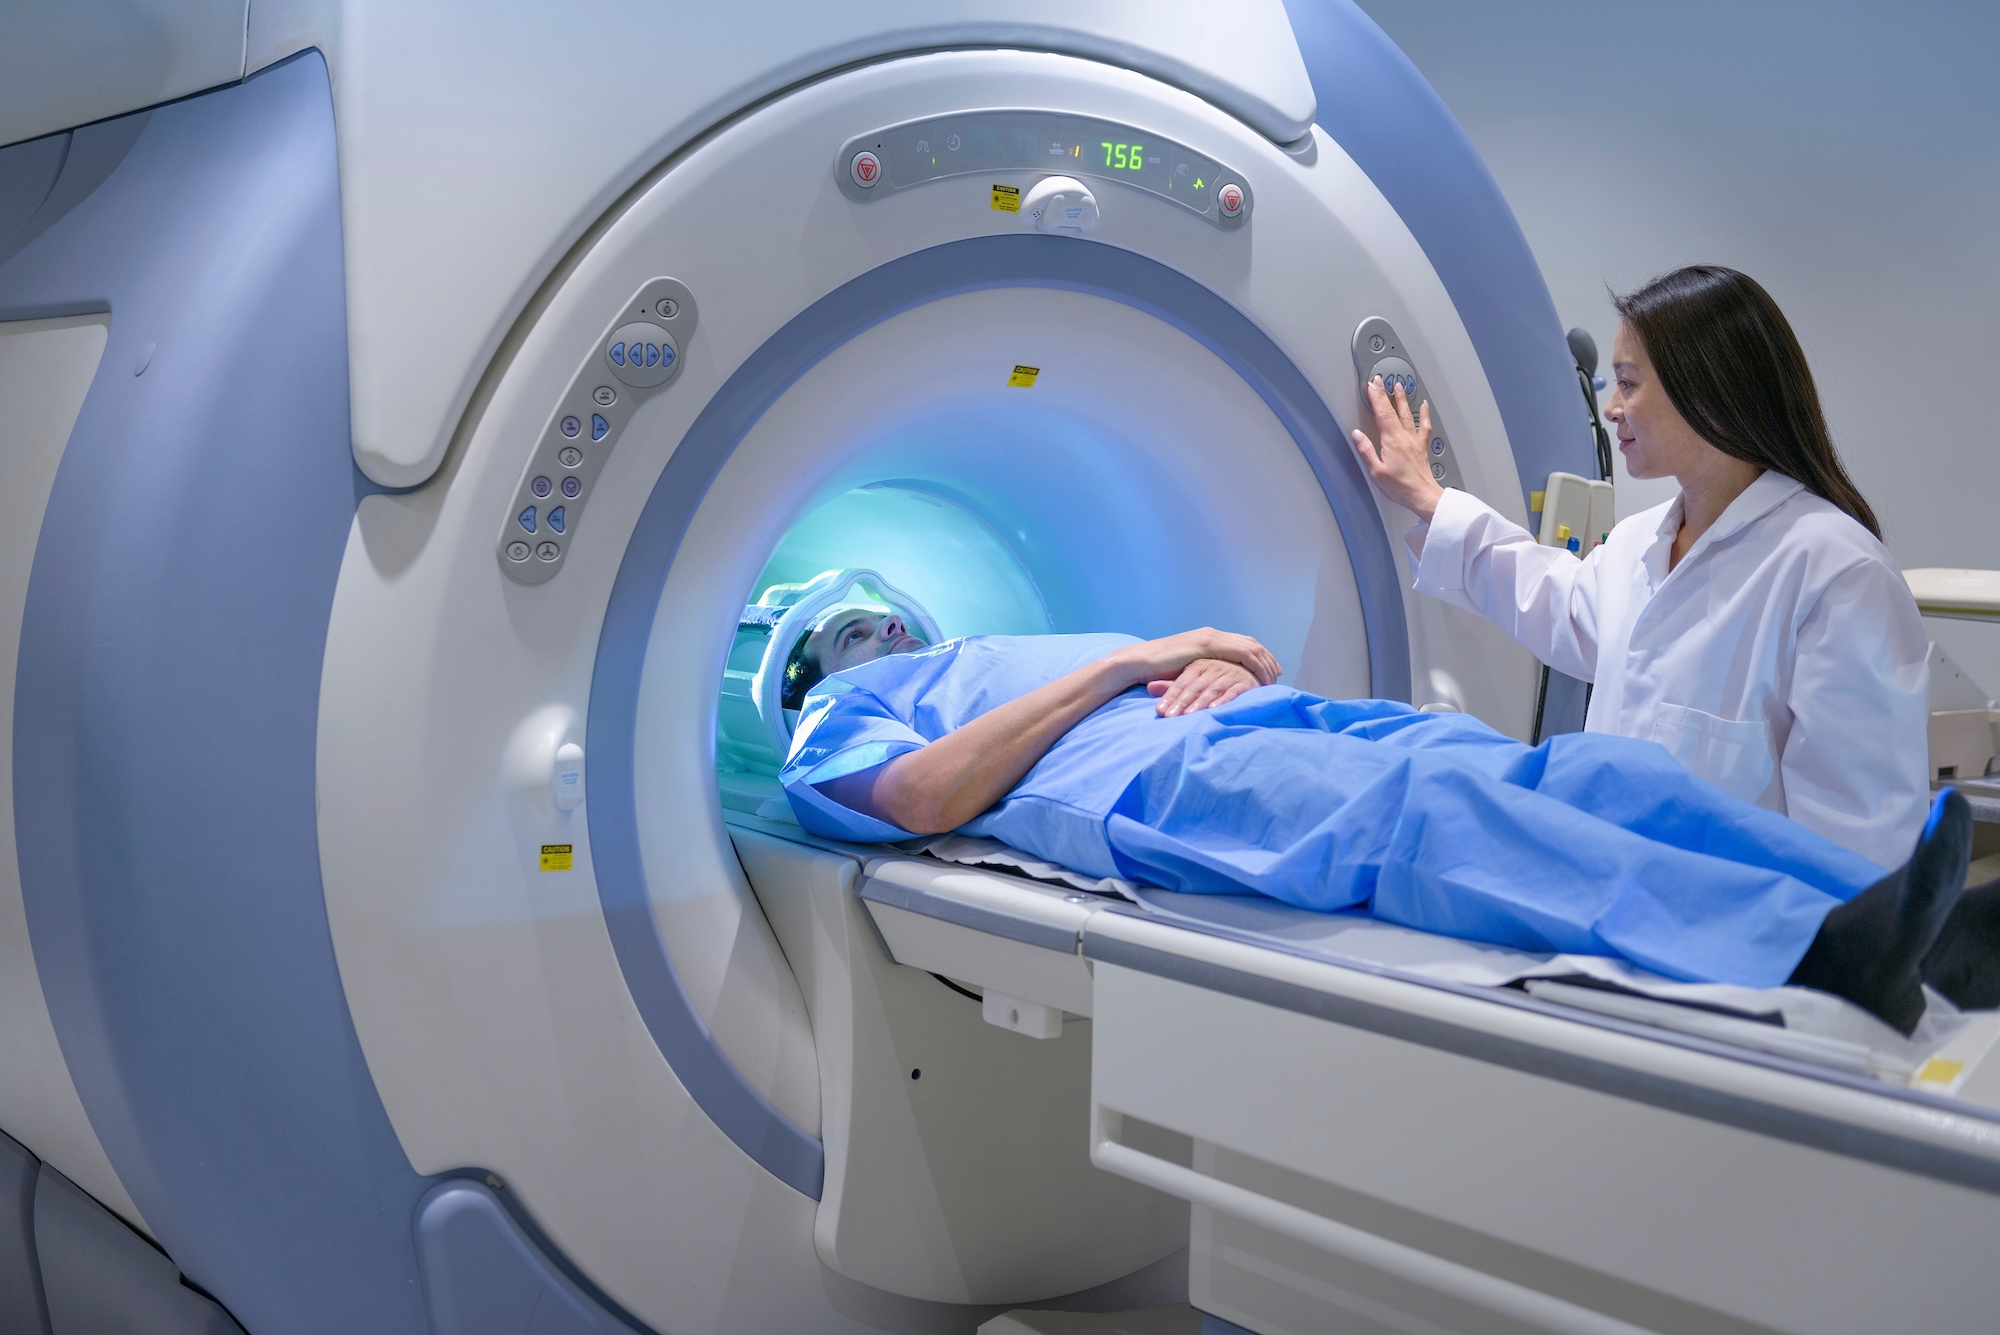 Full-Body MRIs Promise To Detect Disease Early. Do They Work?